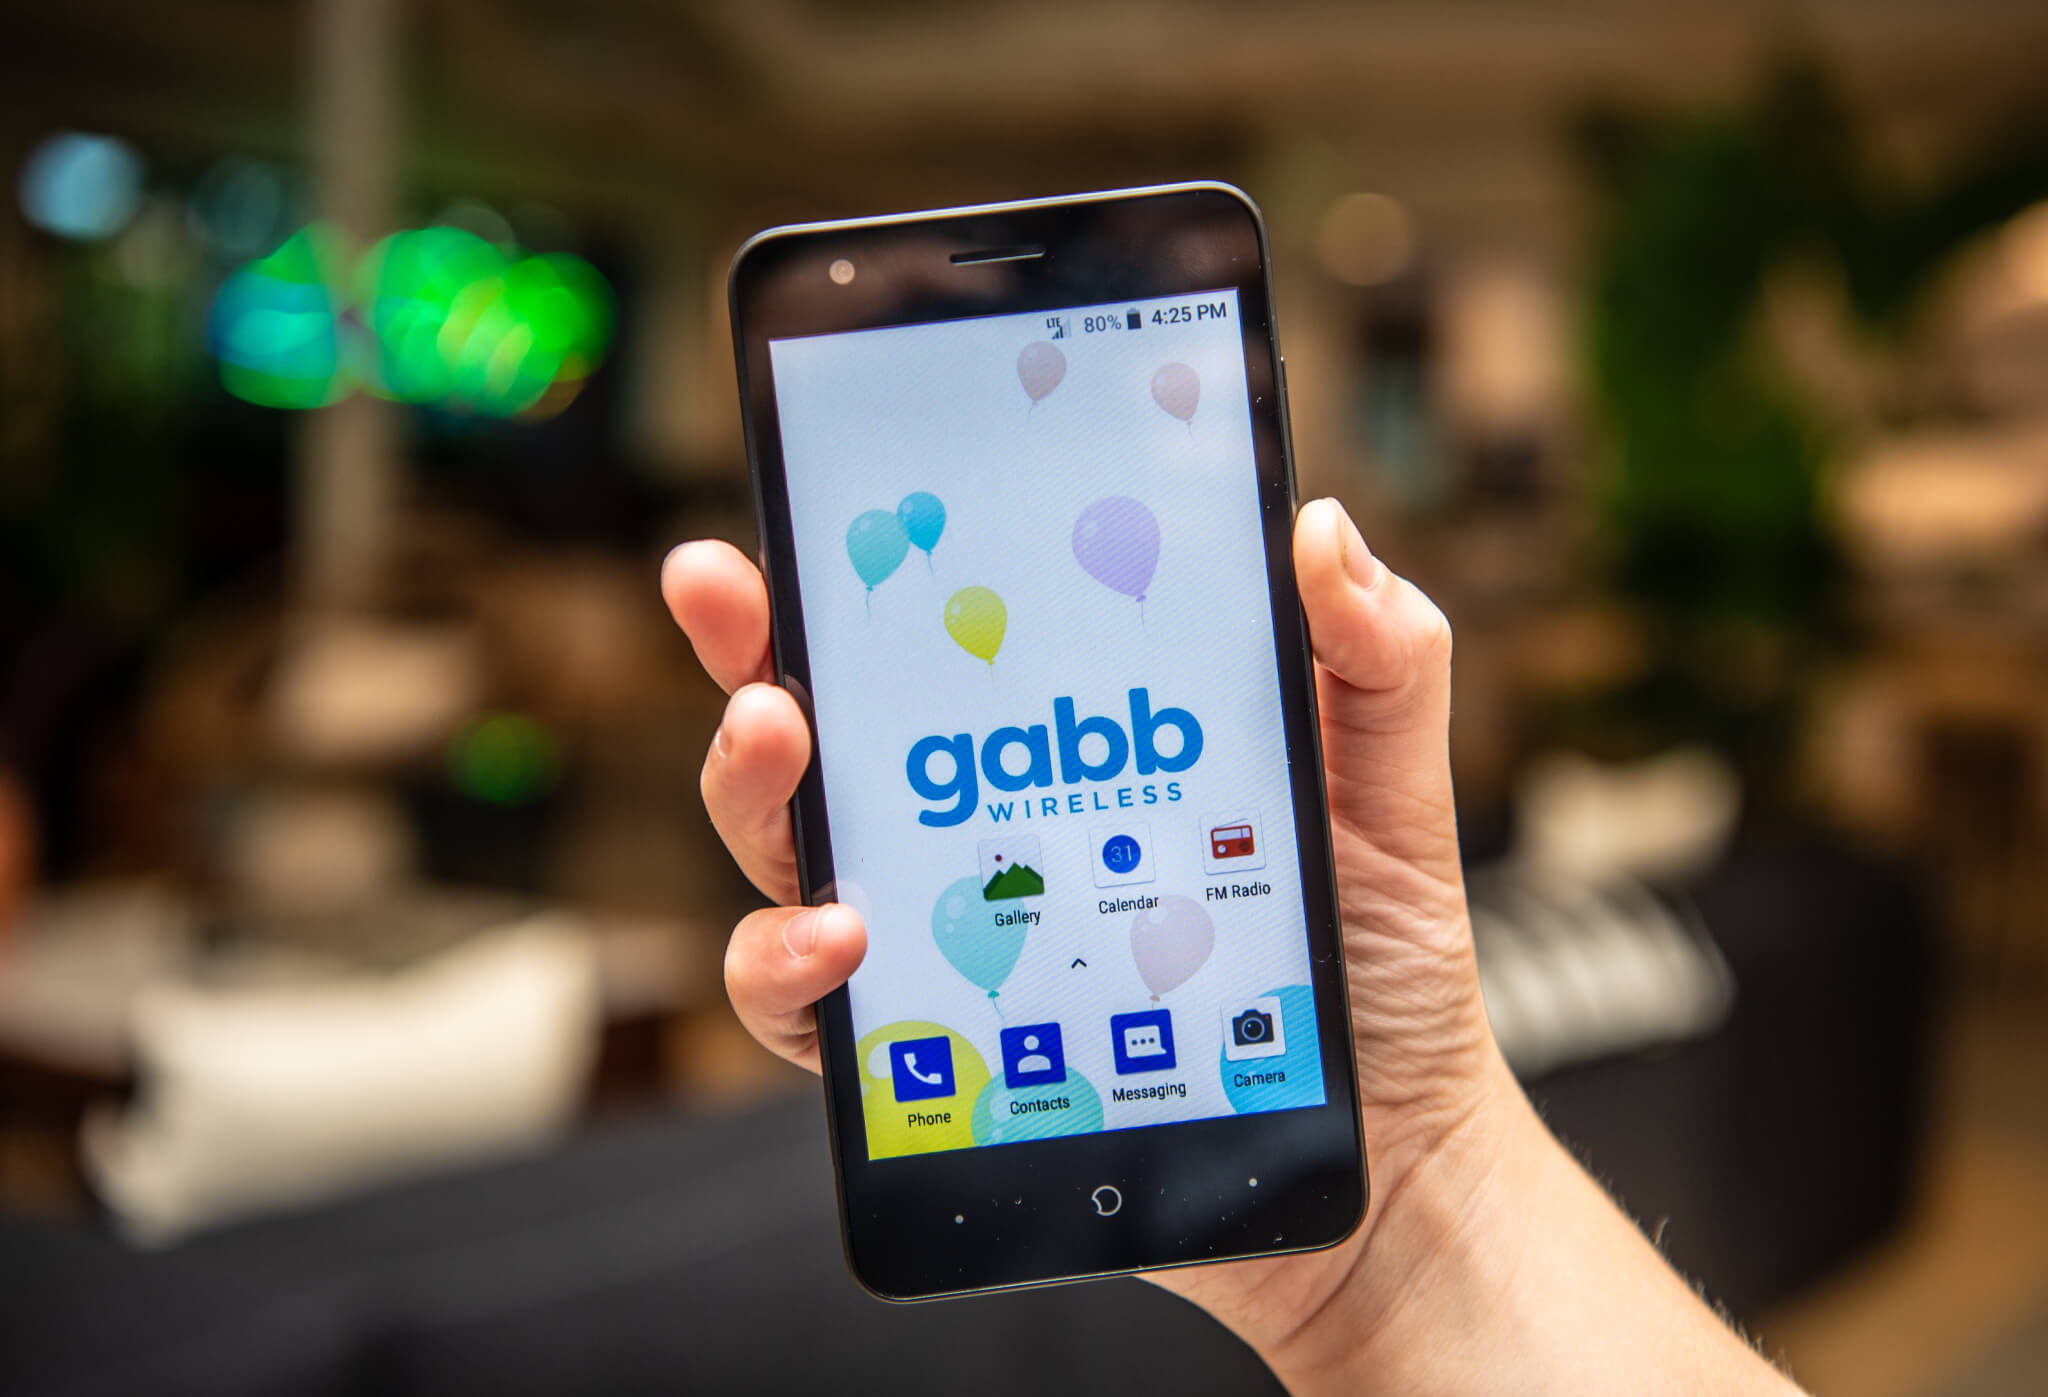 How To Download Games On A Gabb Phone